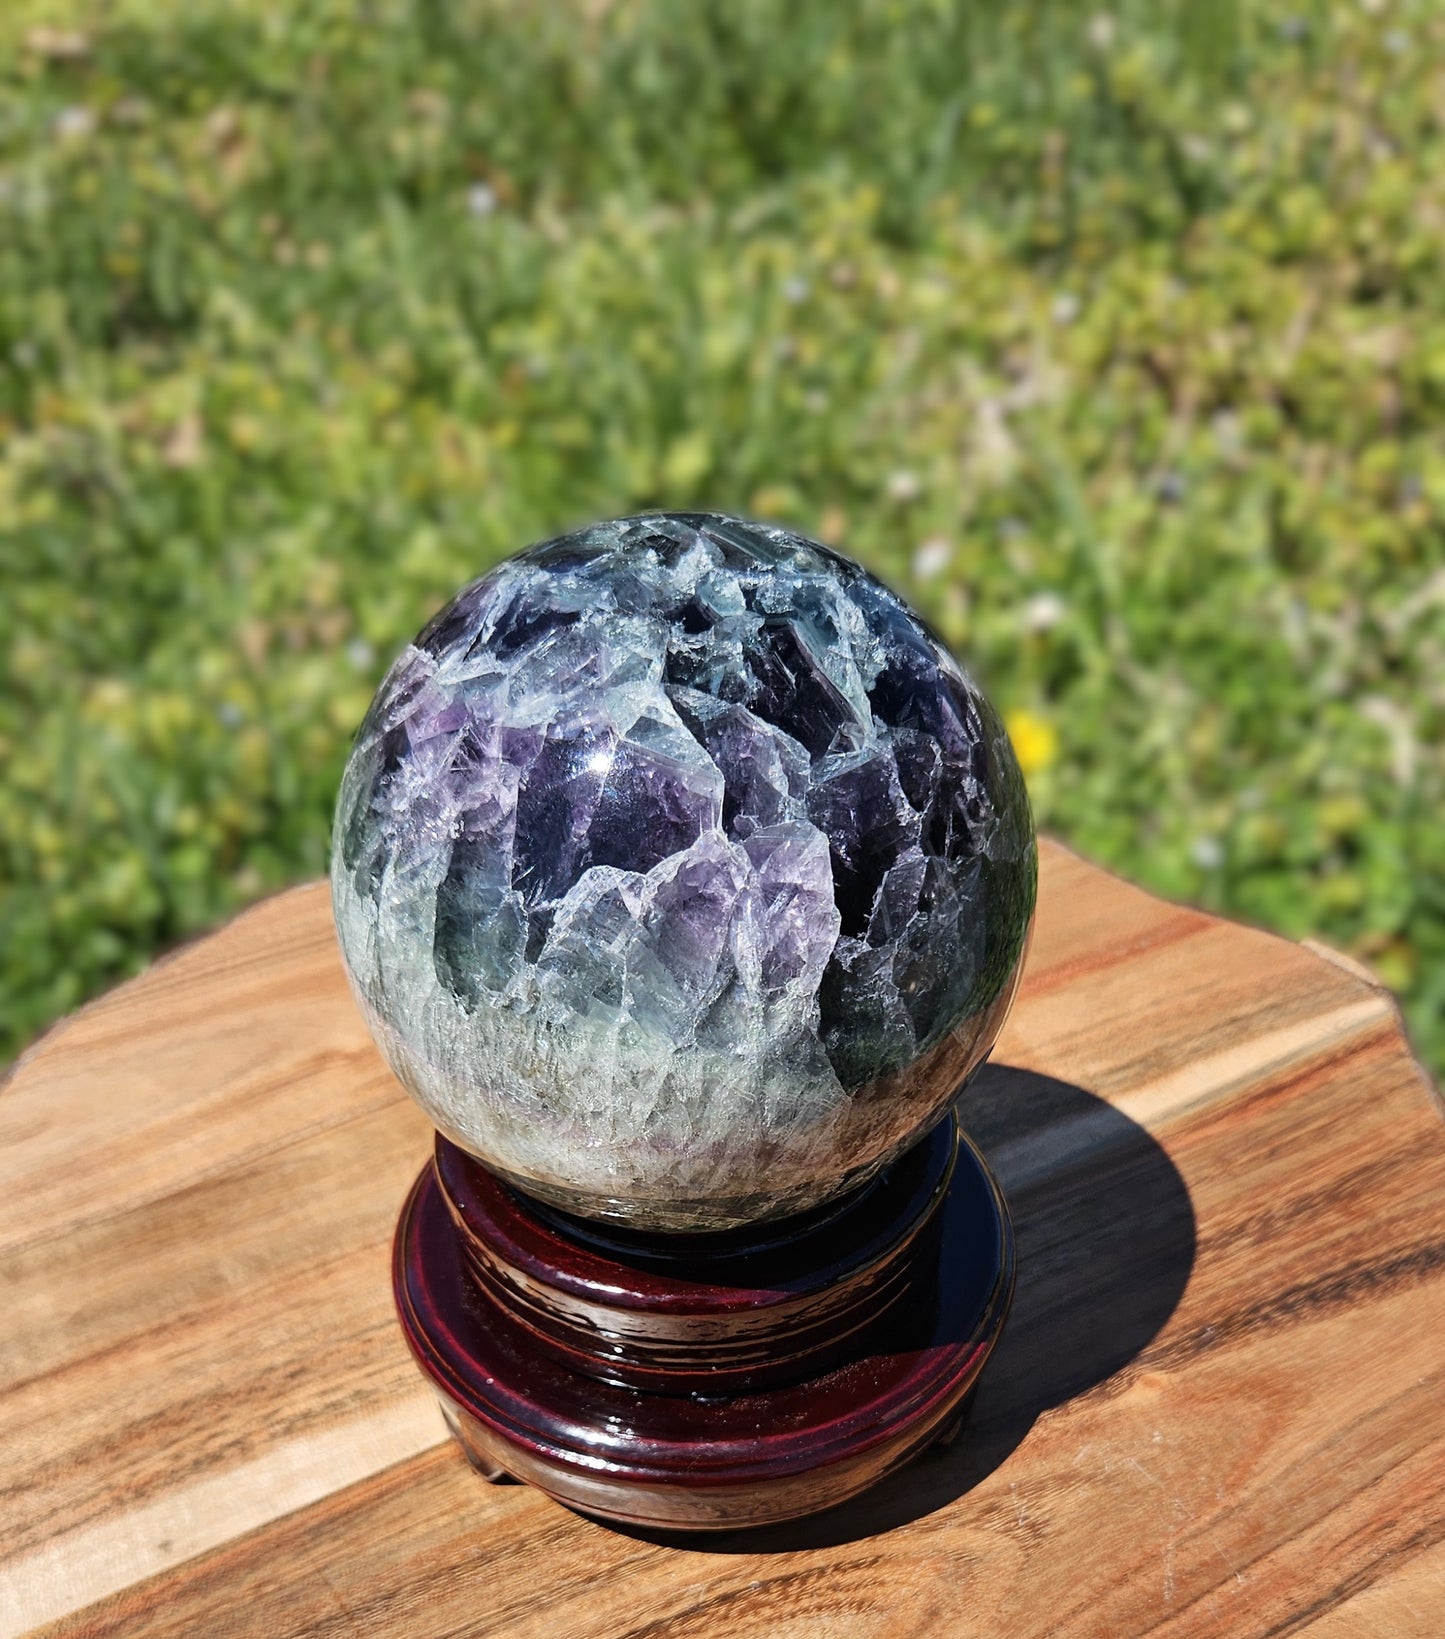 Teal & Purple Feather Flourite Sphere 101mm With Rainbows and free sphere stand